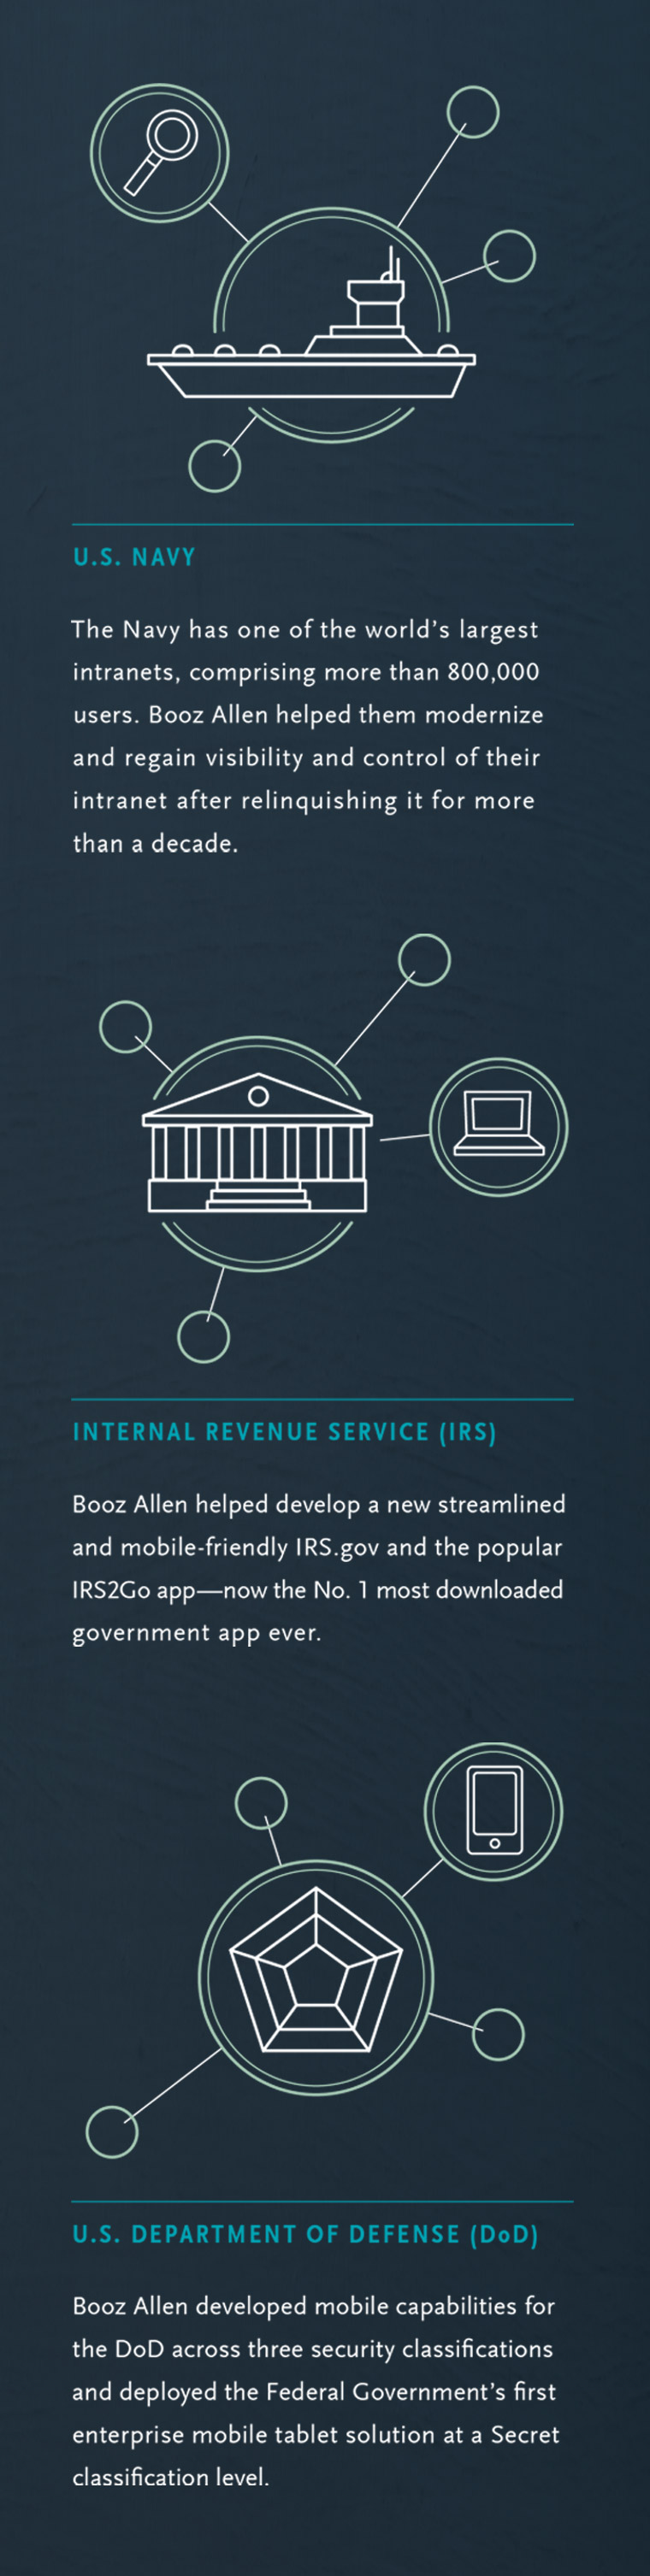 Infographic describing solutions and capabilities Booz Allen has performed, including clients such as the U.S. Navy, Internal Revenue Service (IRS), and U.S. Department of Defense (DOD).